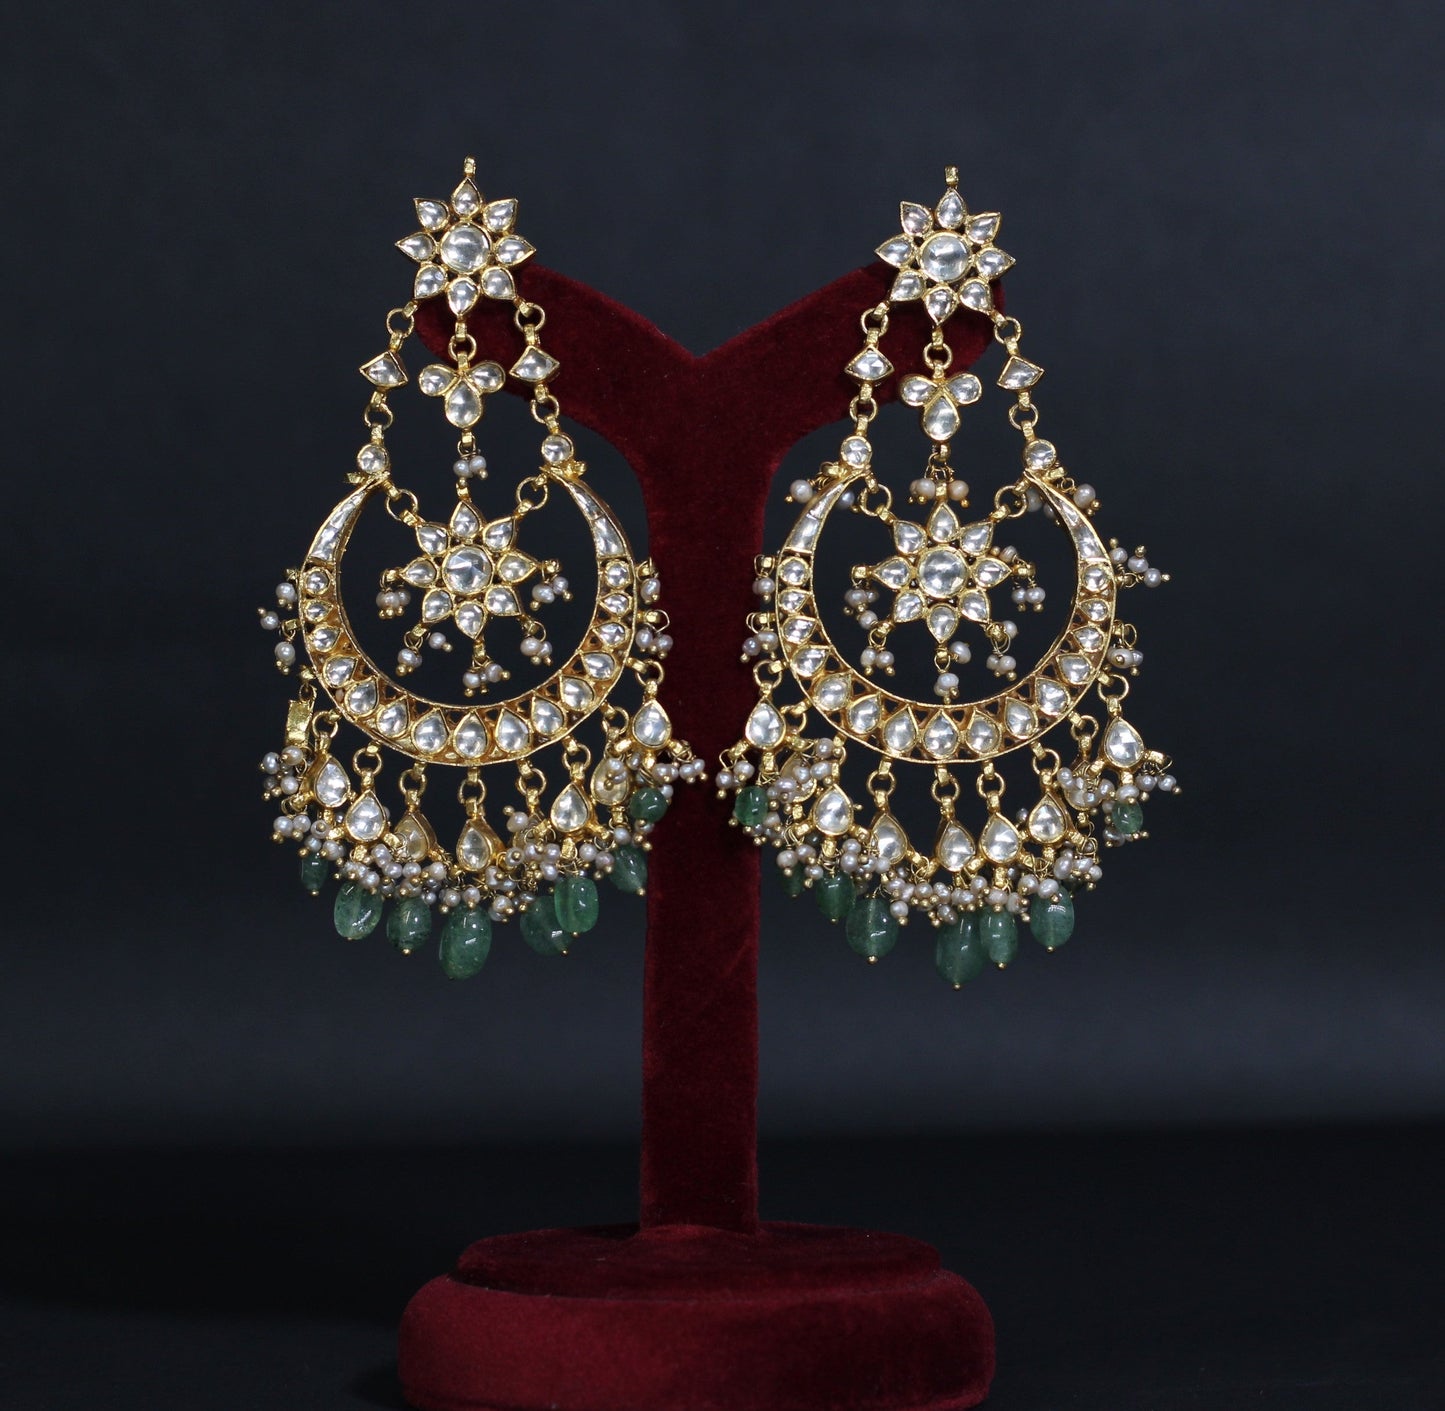 EARRINGS IN 92.5 STERLING SILVER WITH 18KT GOLD PLATED WITH KUNDAN , fluorite stones AND FRESH WATER PEARLS